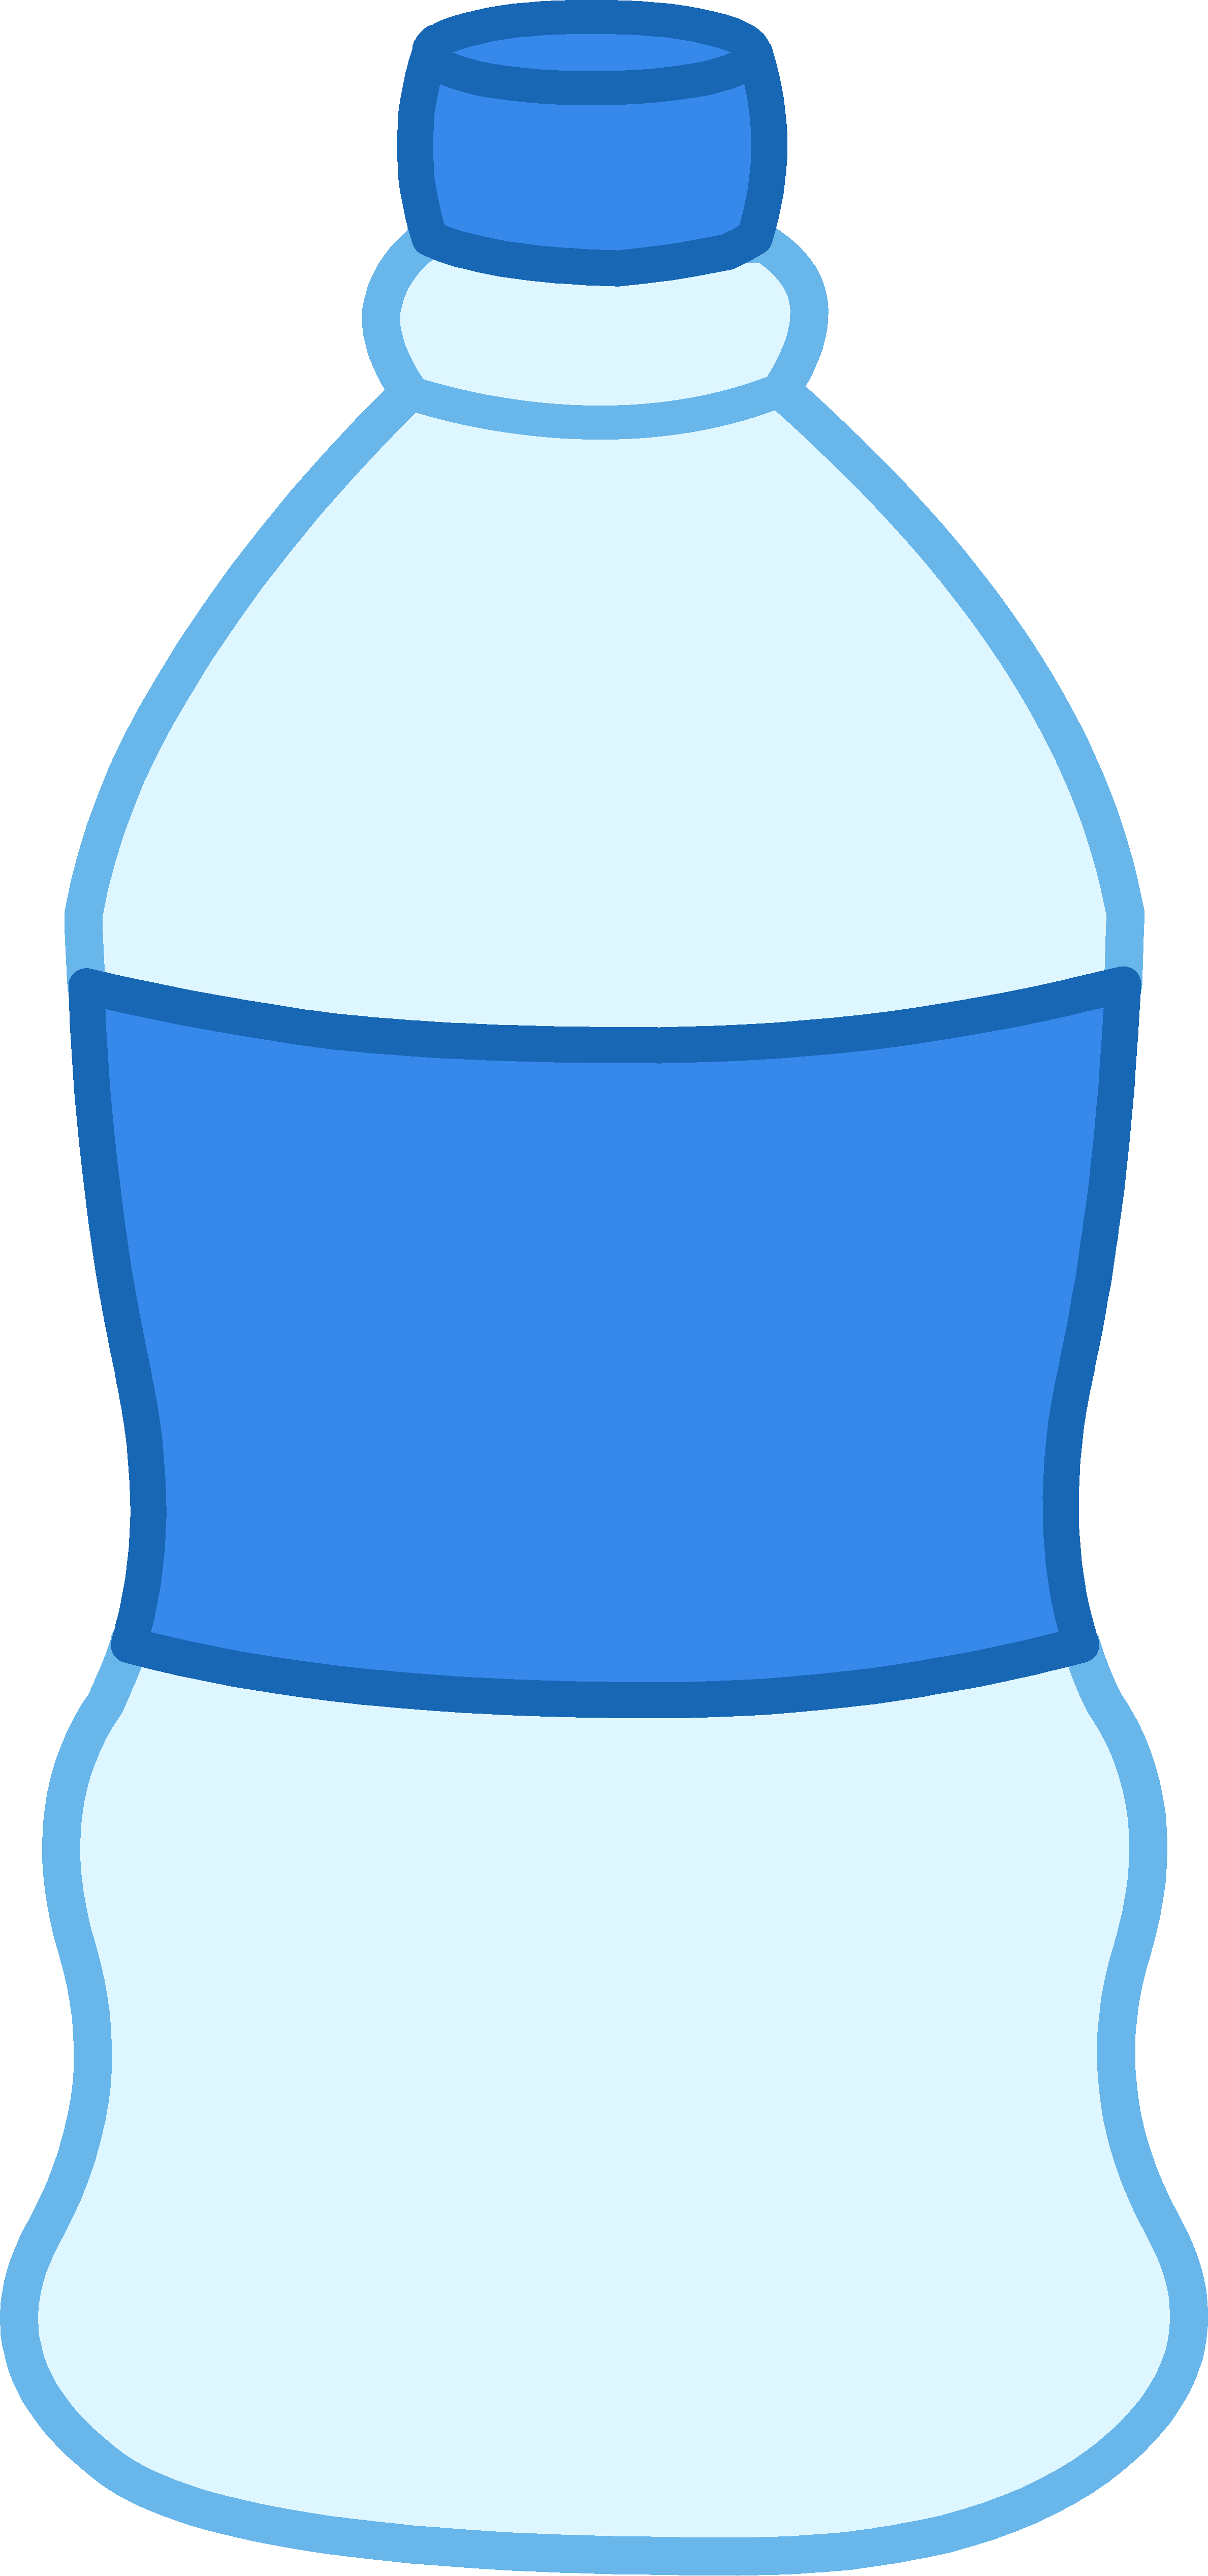 Water clipart transparent.